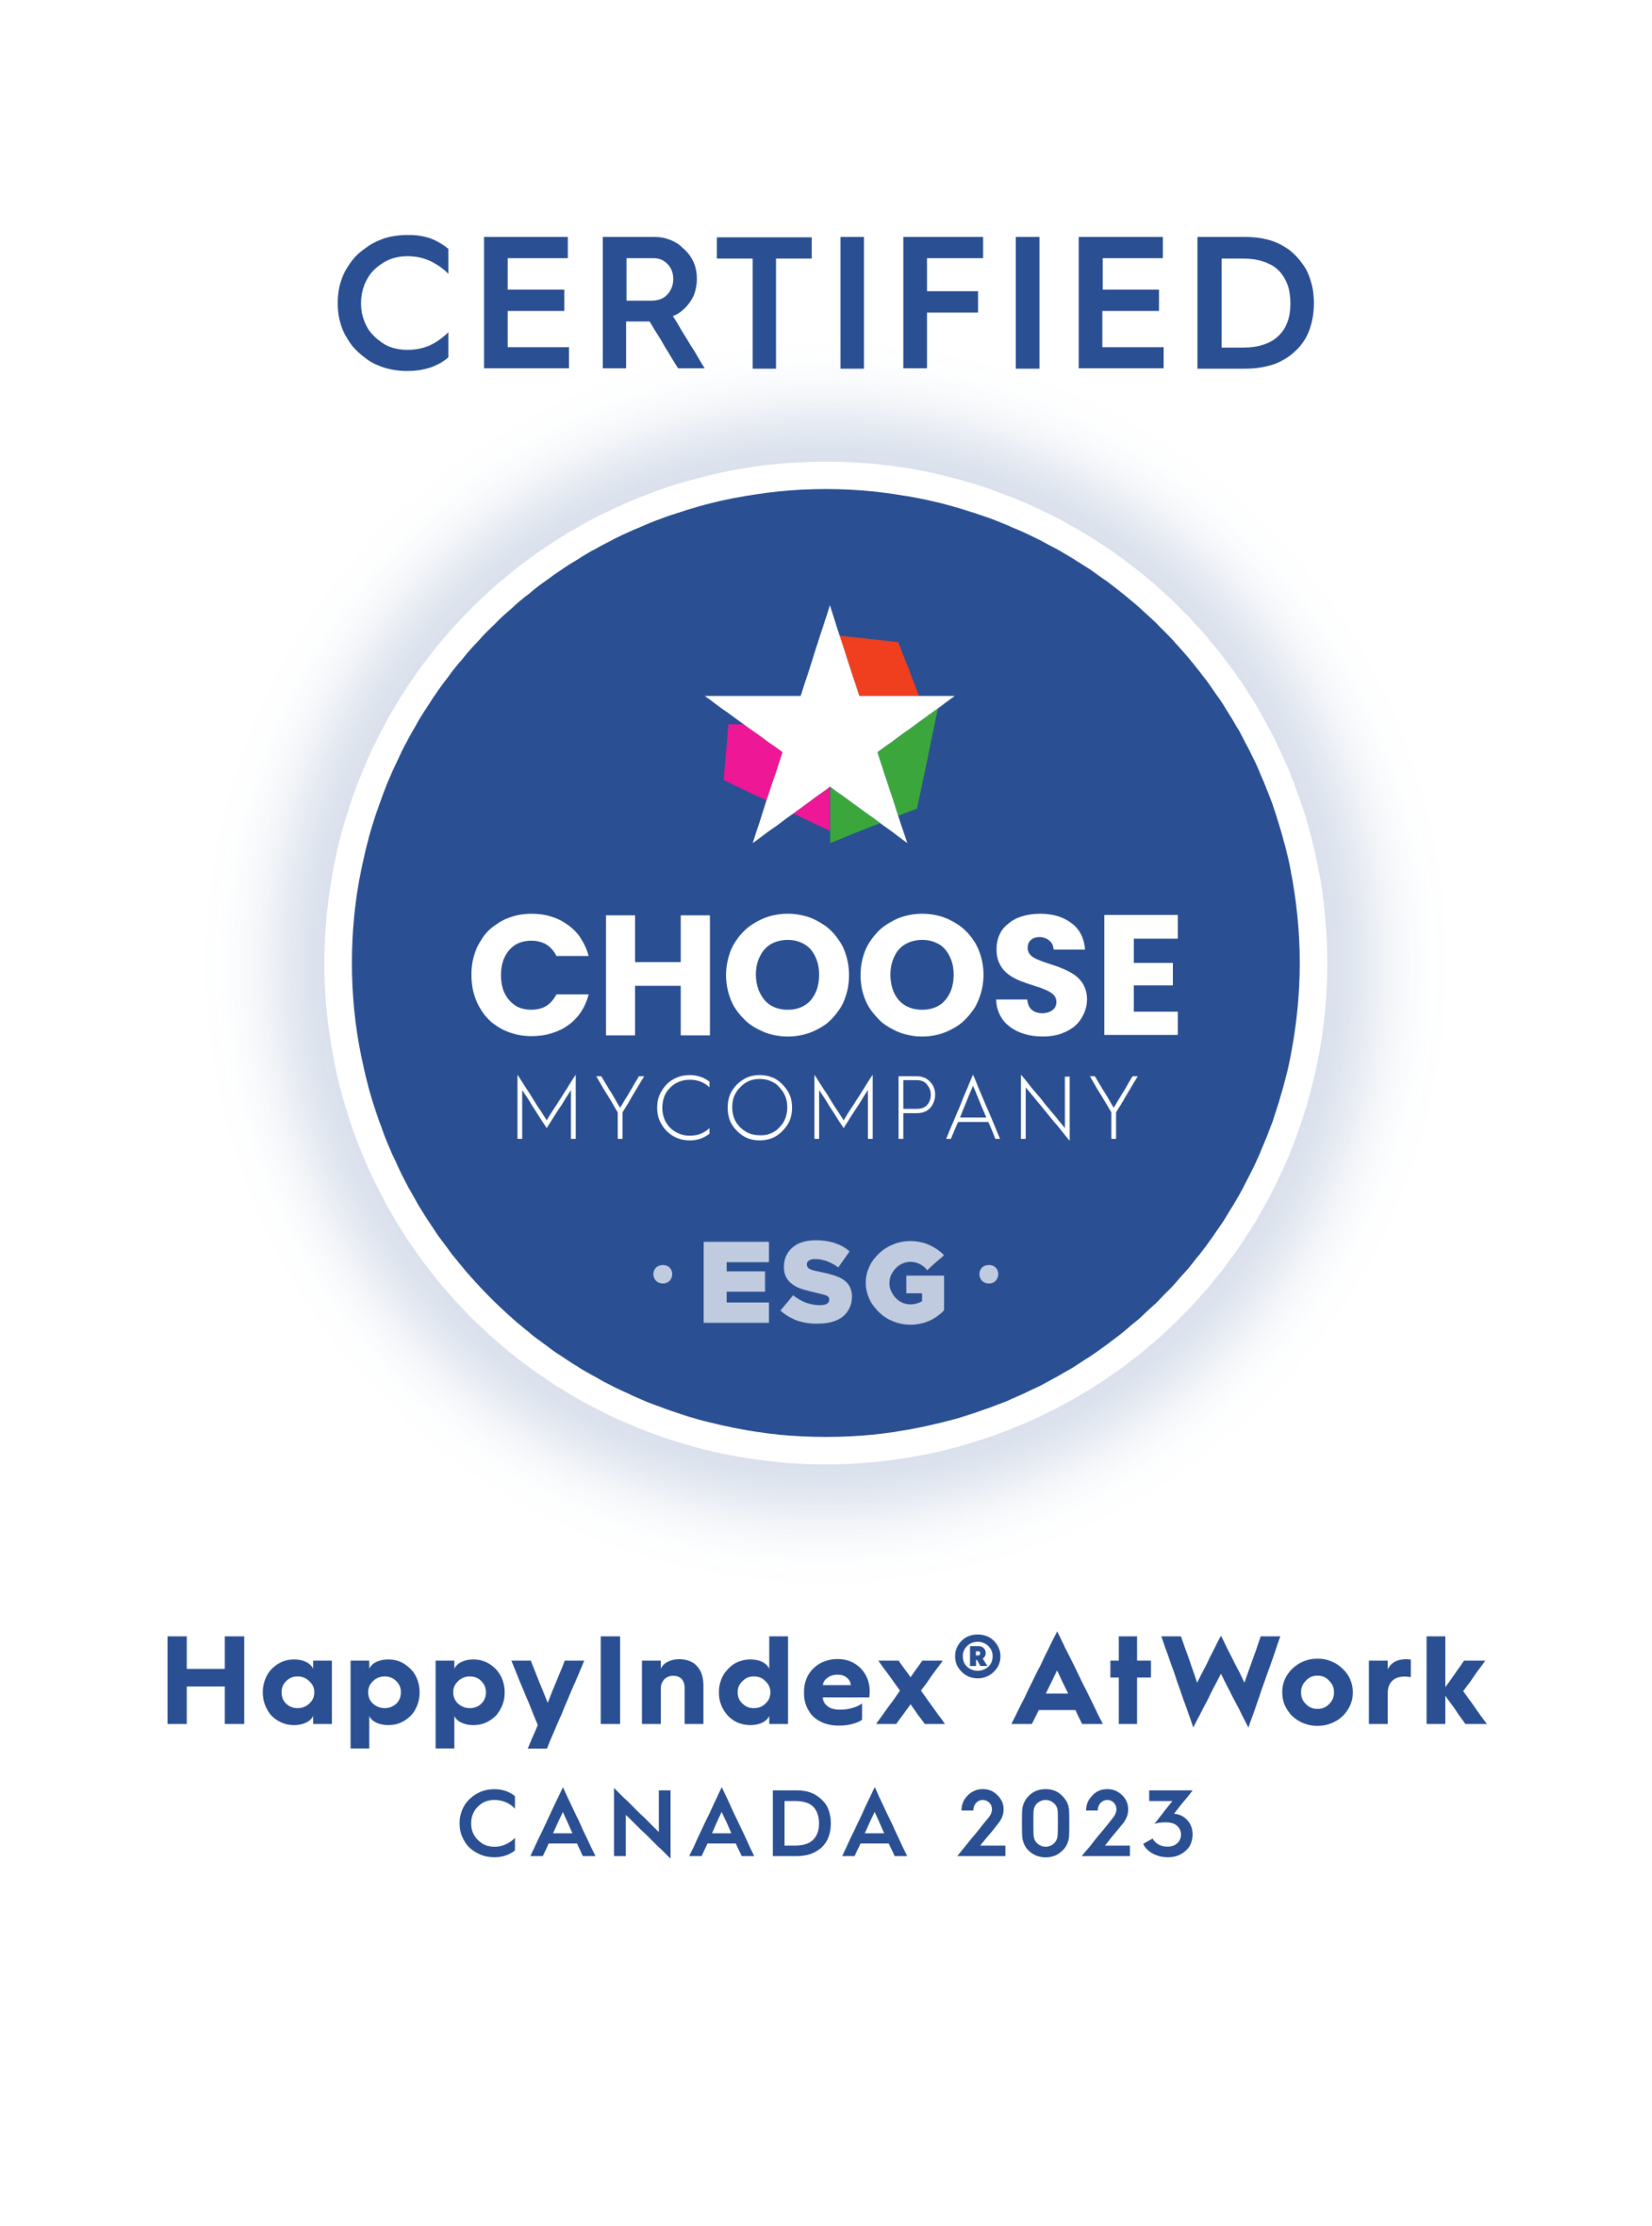 EC Solutions certified Happy At Work since 2021.